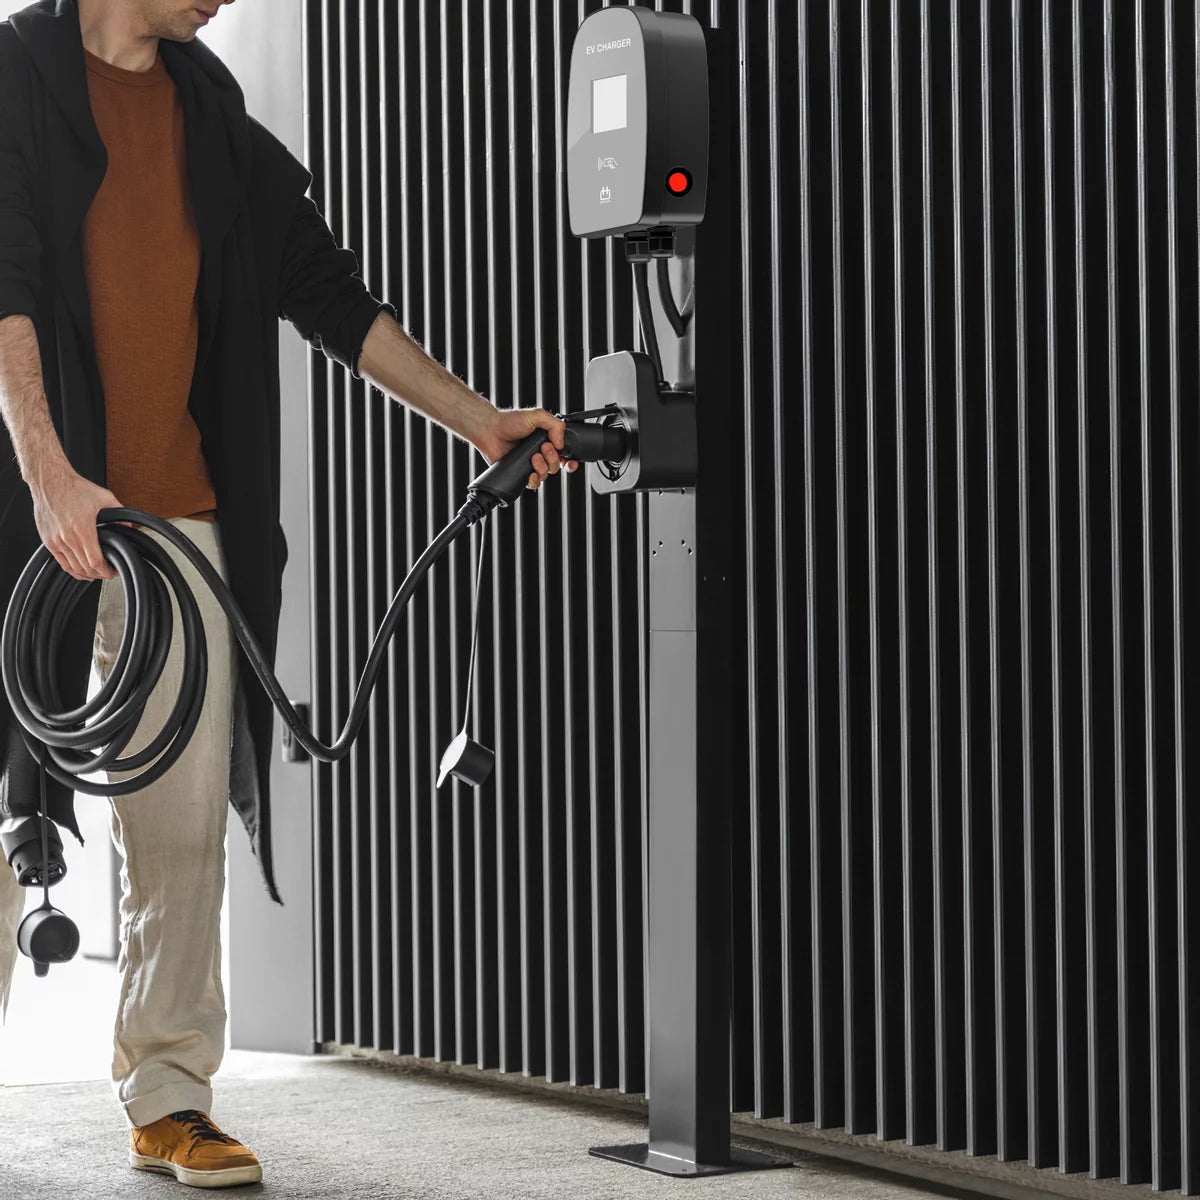 Hysun Model3 7KW 11KW 22KW Wallbox EV Charger type 2 connector Commercial using with OCPP